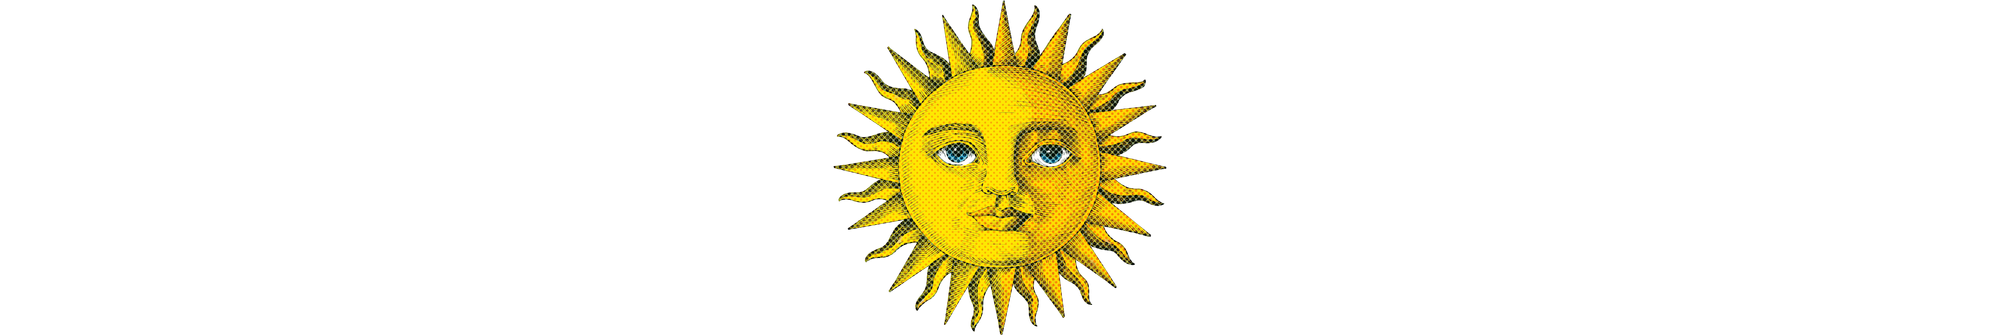 Graphic of sun with face